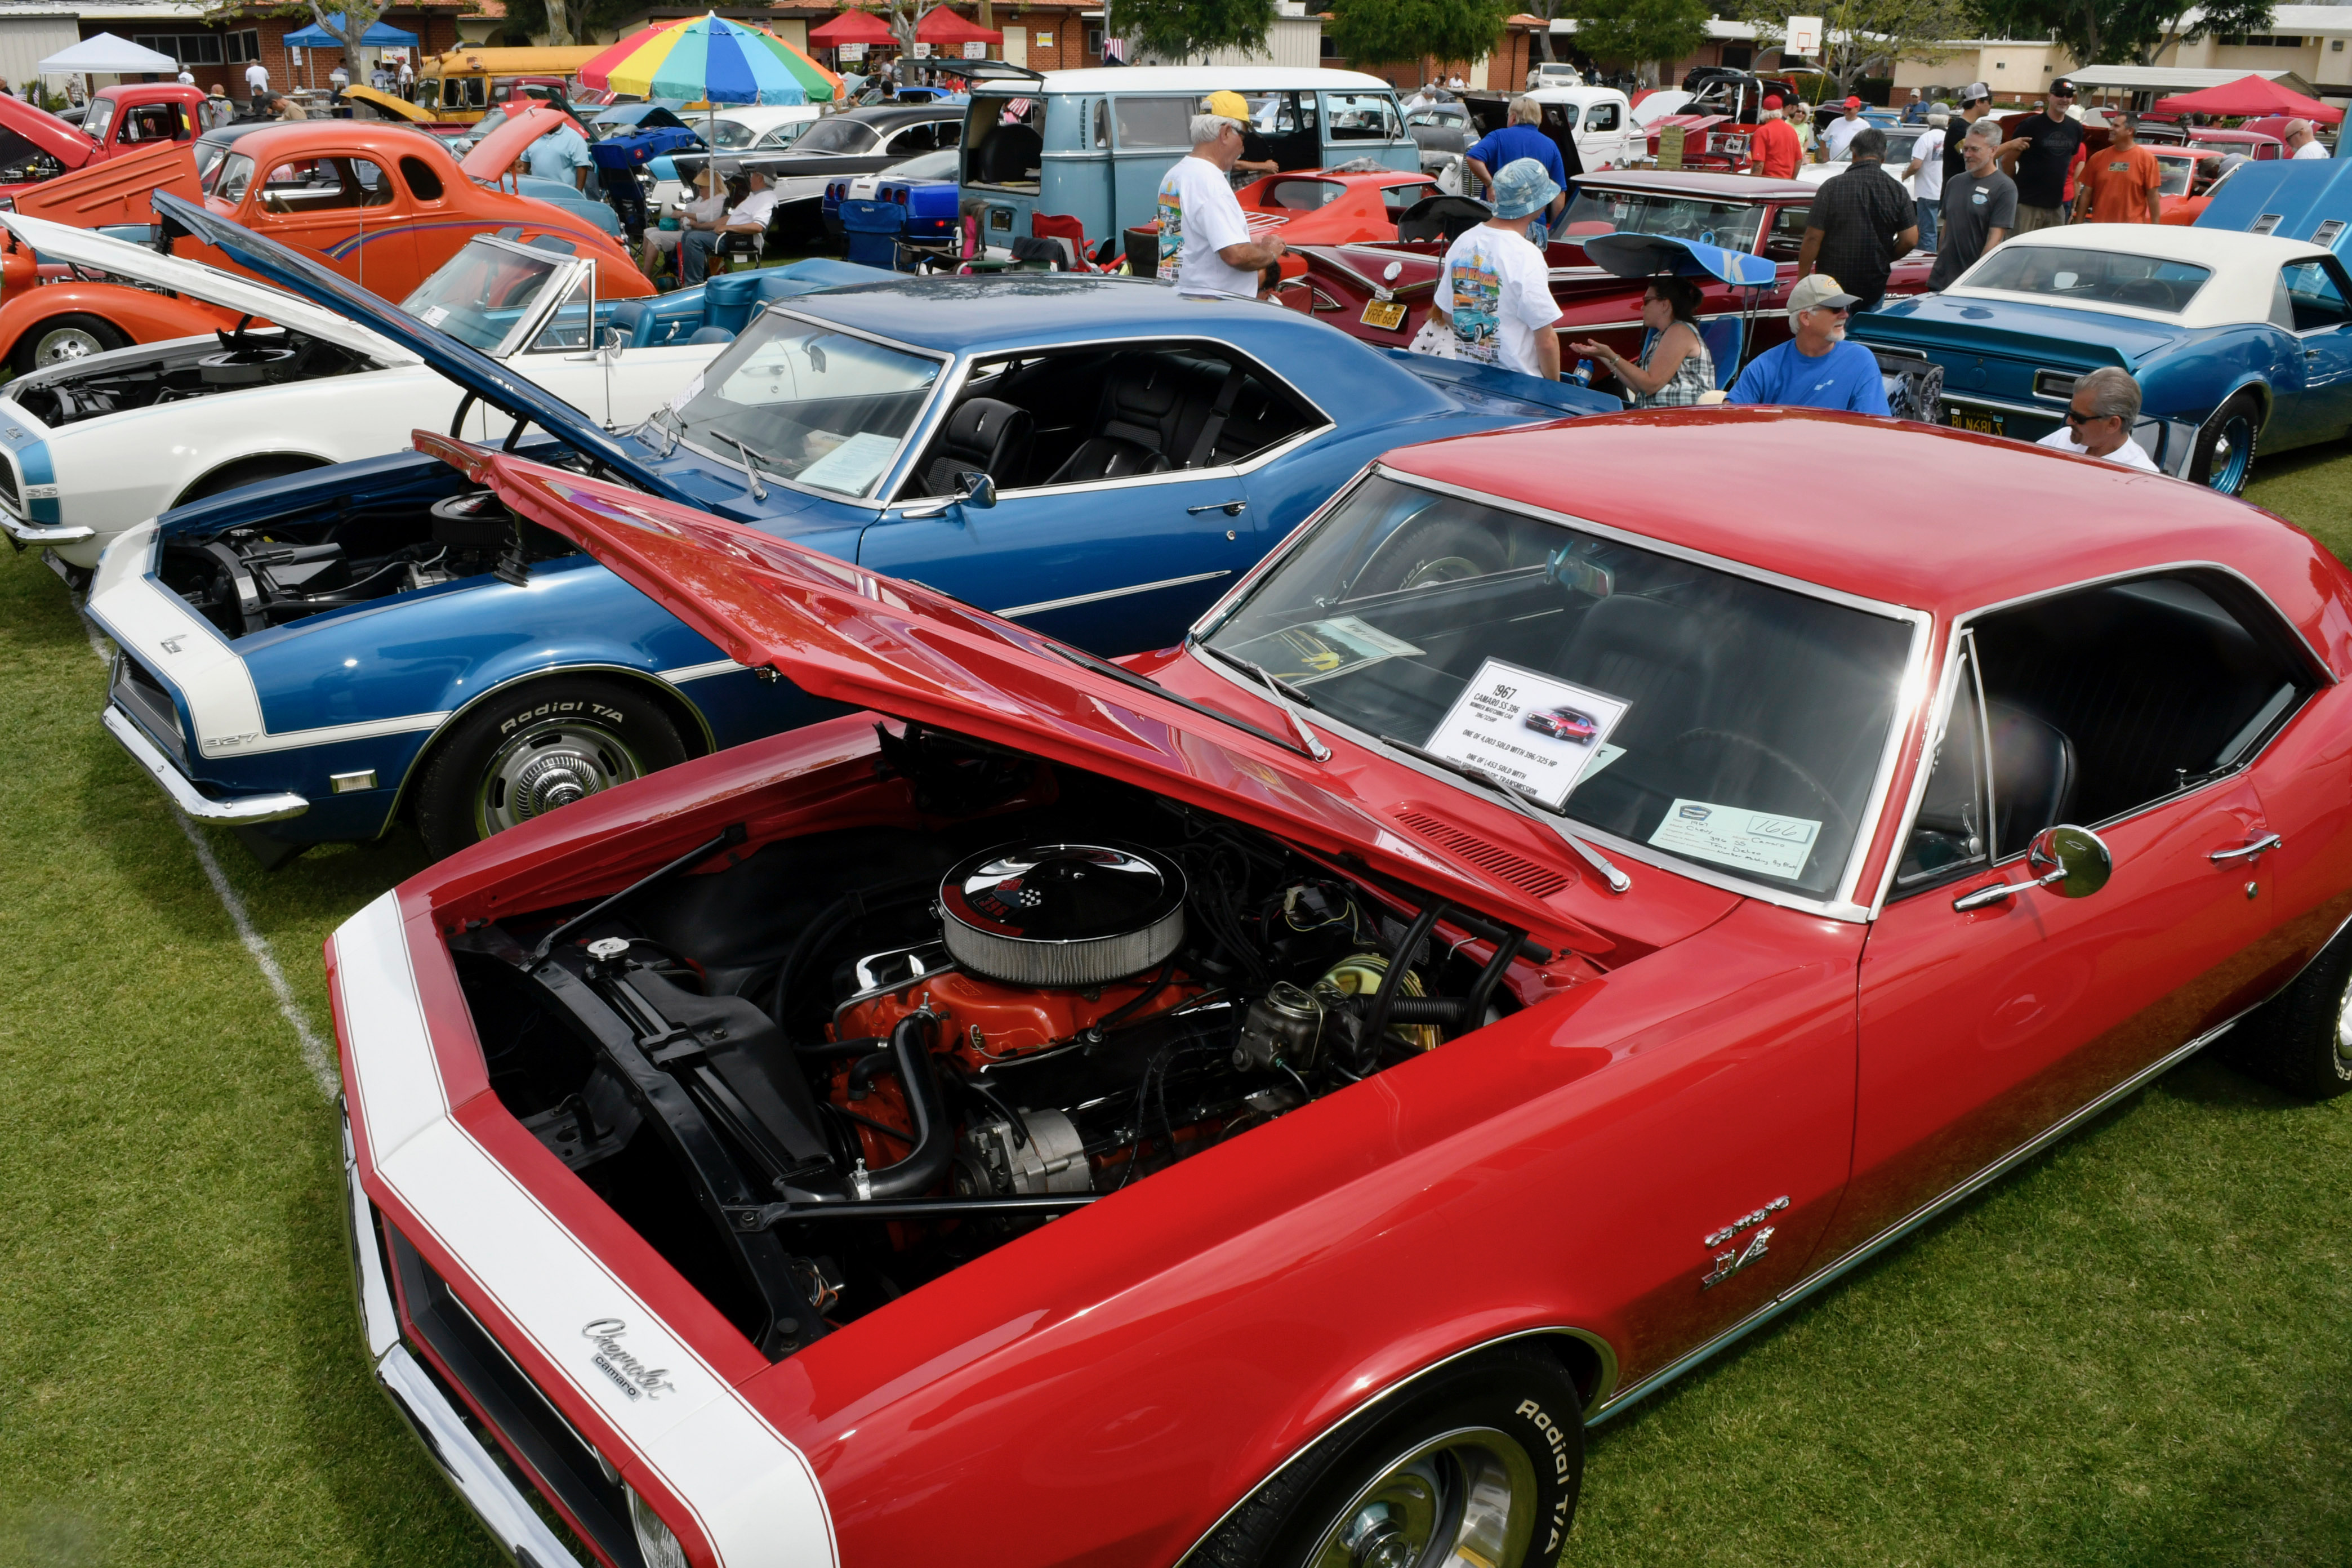 Chevy, Classic Chevys show supports youth — and crowns a Ford, ClassicCars.com Journal